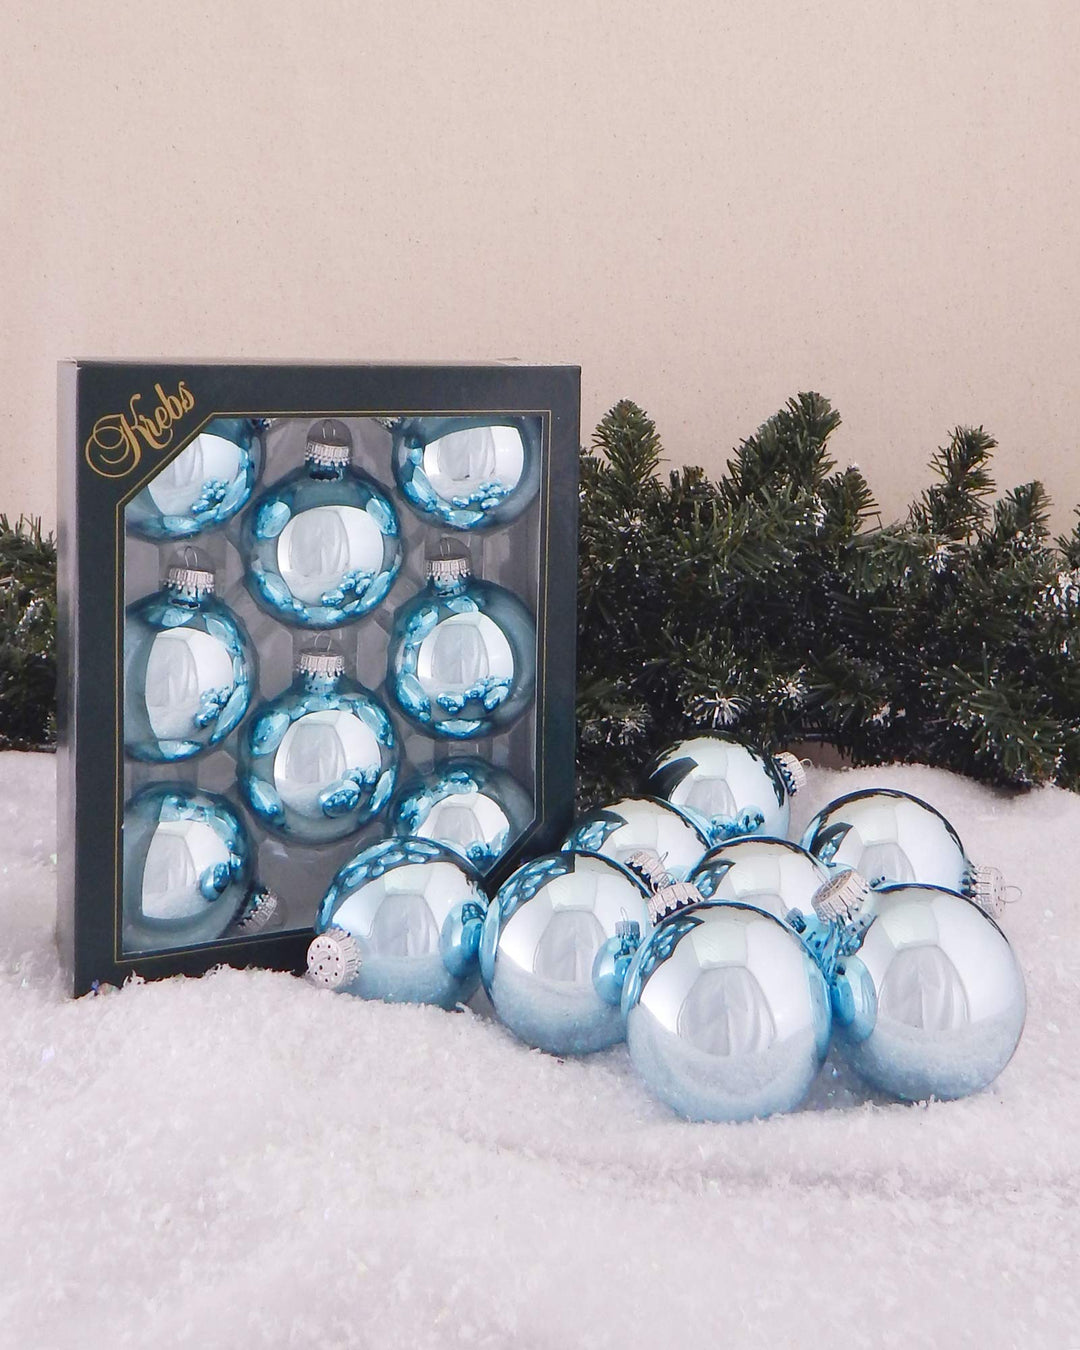 Glass Christmas Tree Ornaments - 67mm / 2.63" [8 Pieces] Designer Balls from Christmas By Krebs Seamless Hanging Holiday Decor (Shiny Starlight Blue)